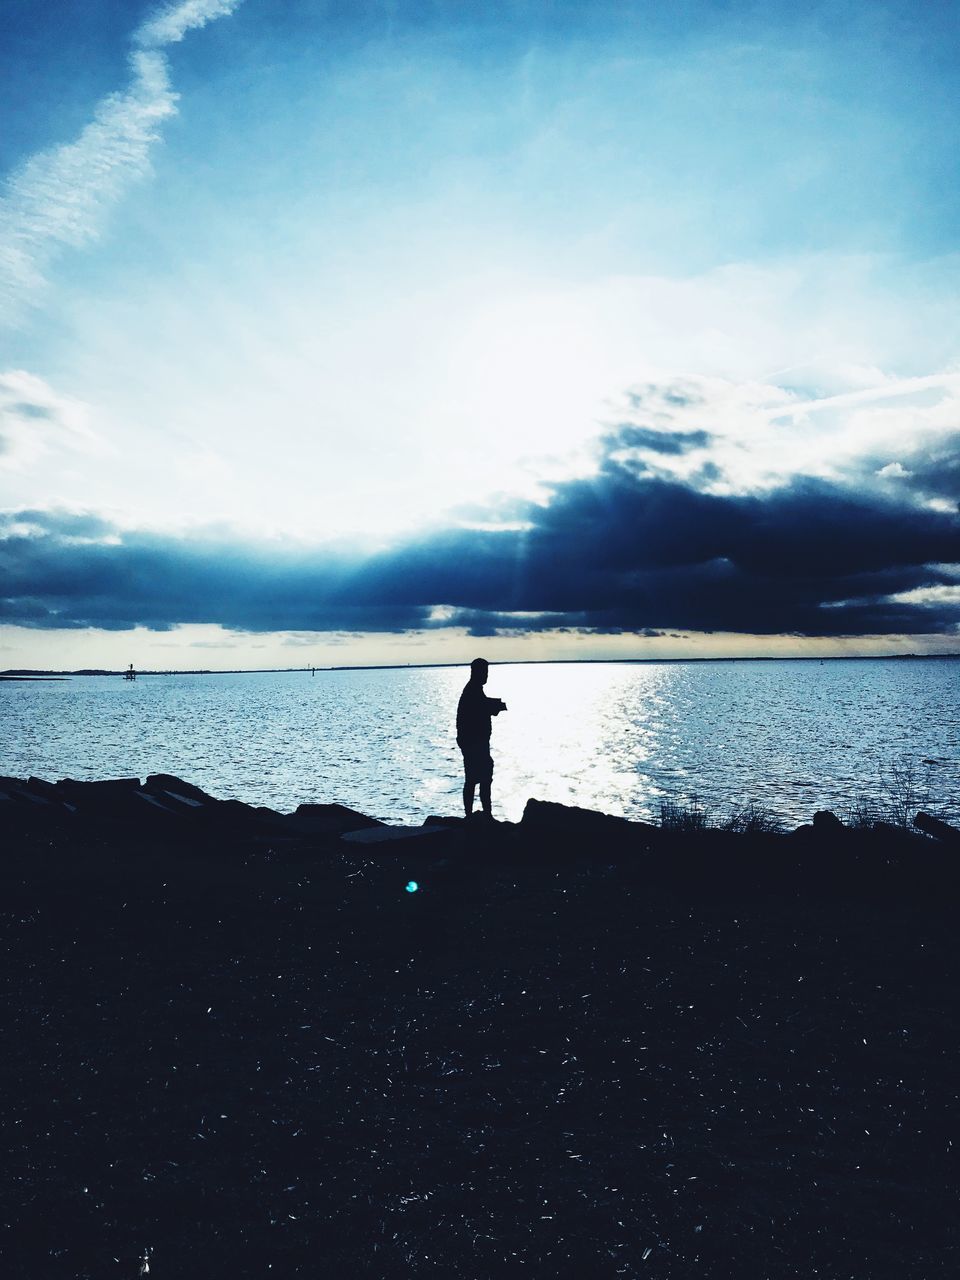 SILHOUETTE MAN STANDING ON SHORE AGAINST SKY